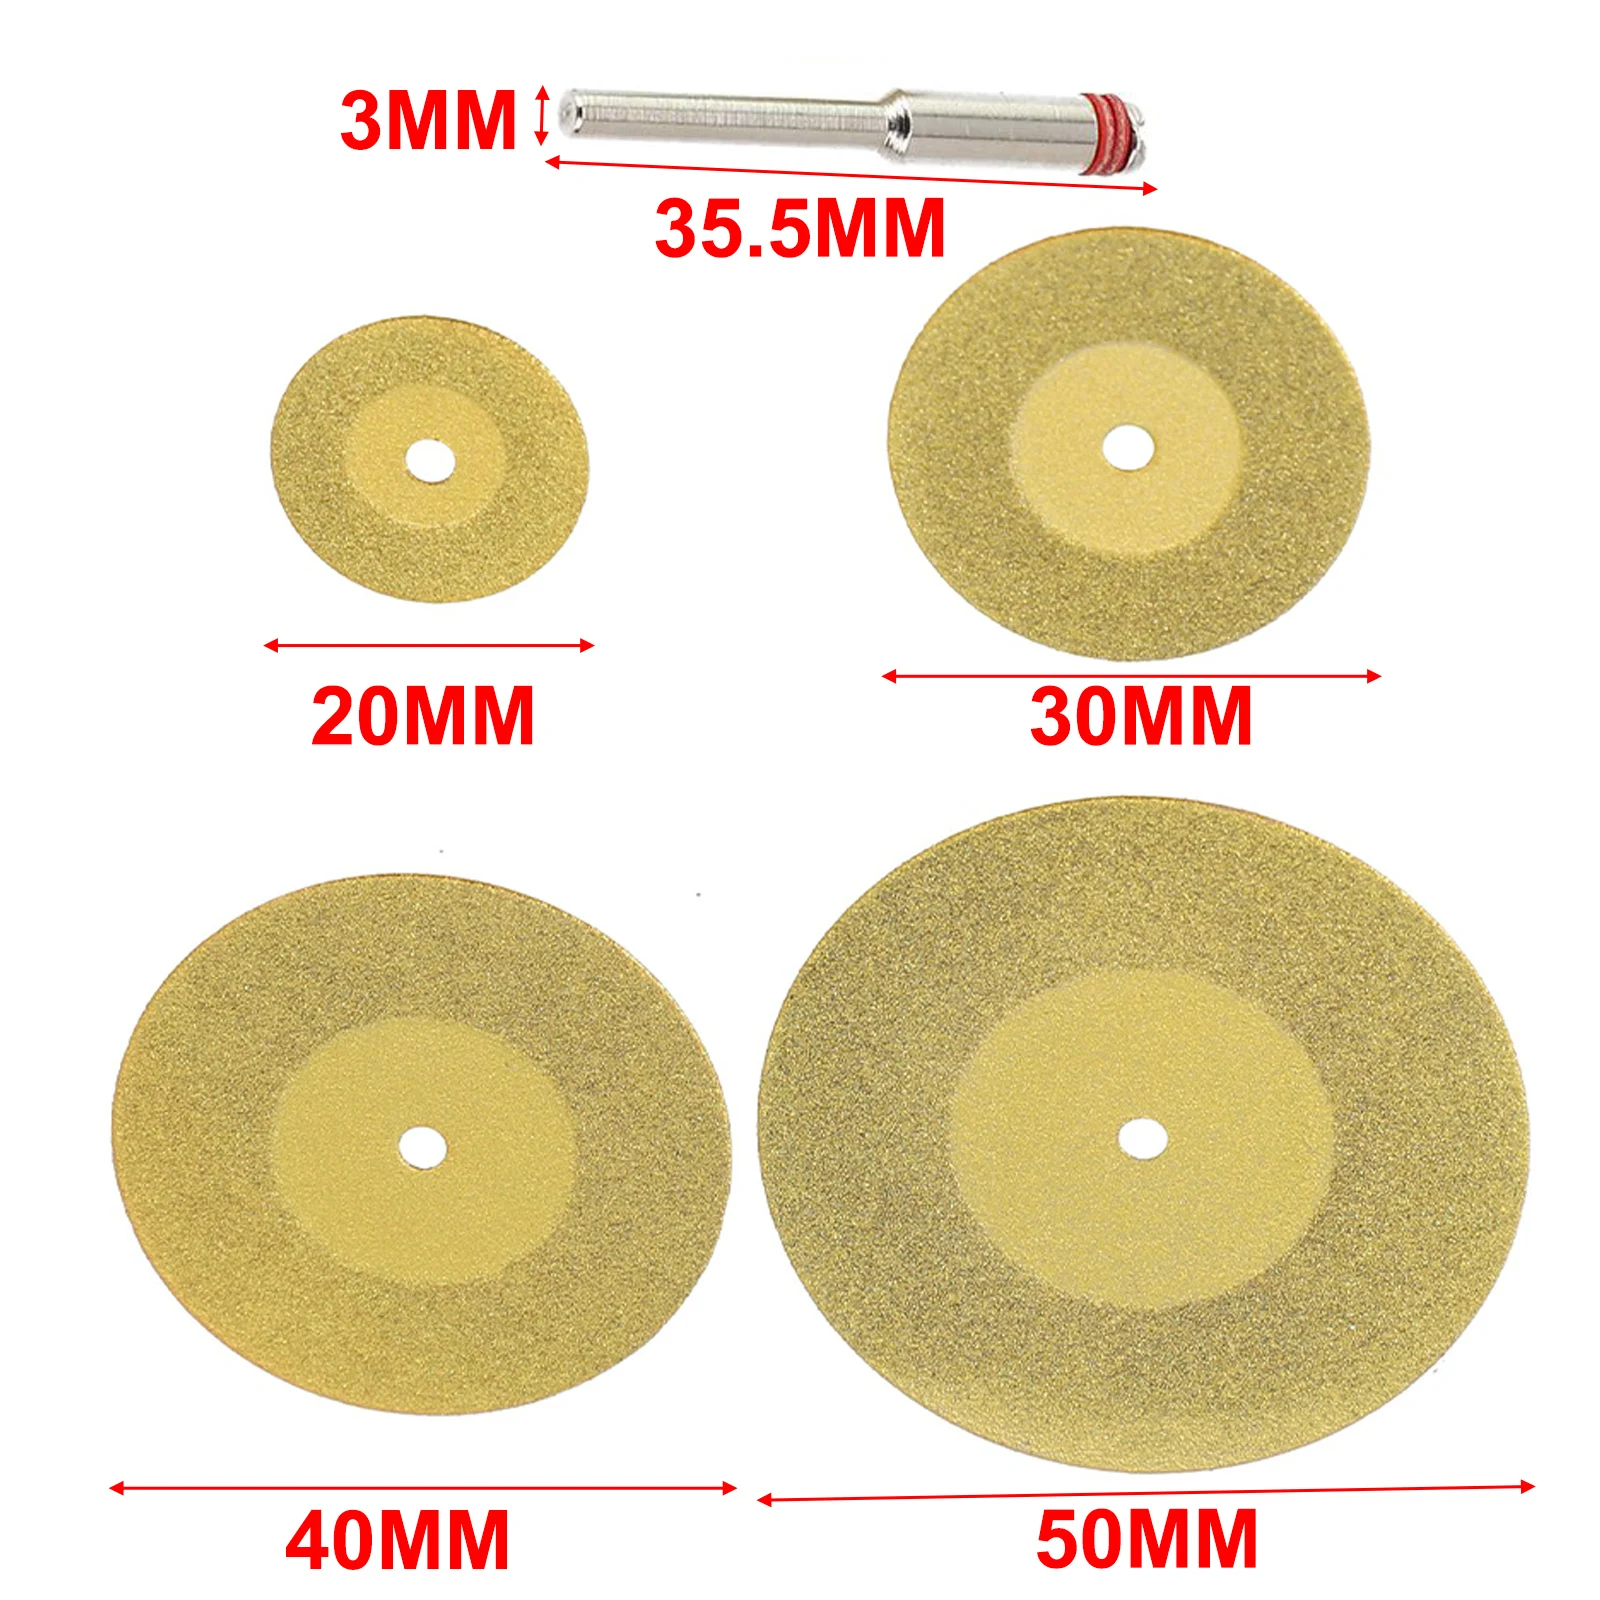 

Brand New Diamond Saw Blade Connecting Rod Replacement Rotary Tools Titanium Coated 3mm Shank For Aluminium Copper